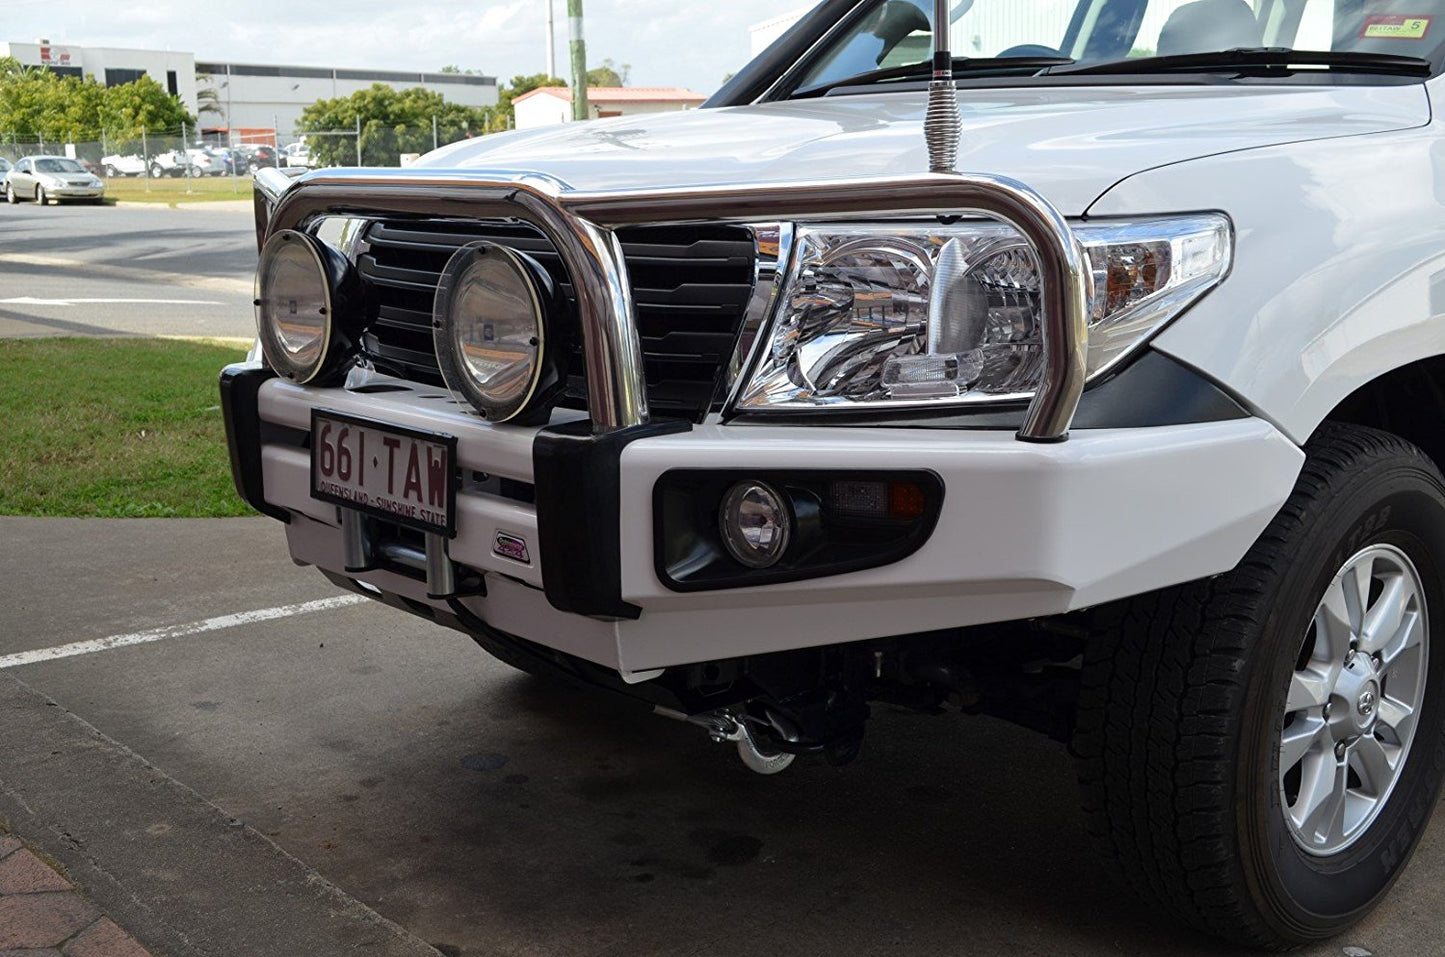 Dobinsons 4x4 Stainless Loop Deluxe Bullbar for Toyota Land Cruiser 200 Series 2008 to 2015 Only(BU59-3688)